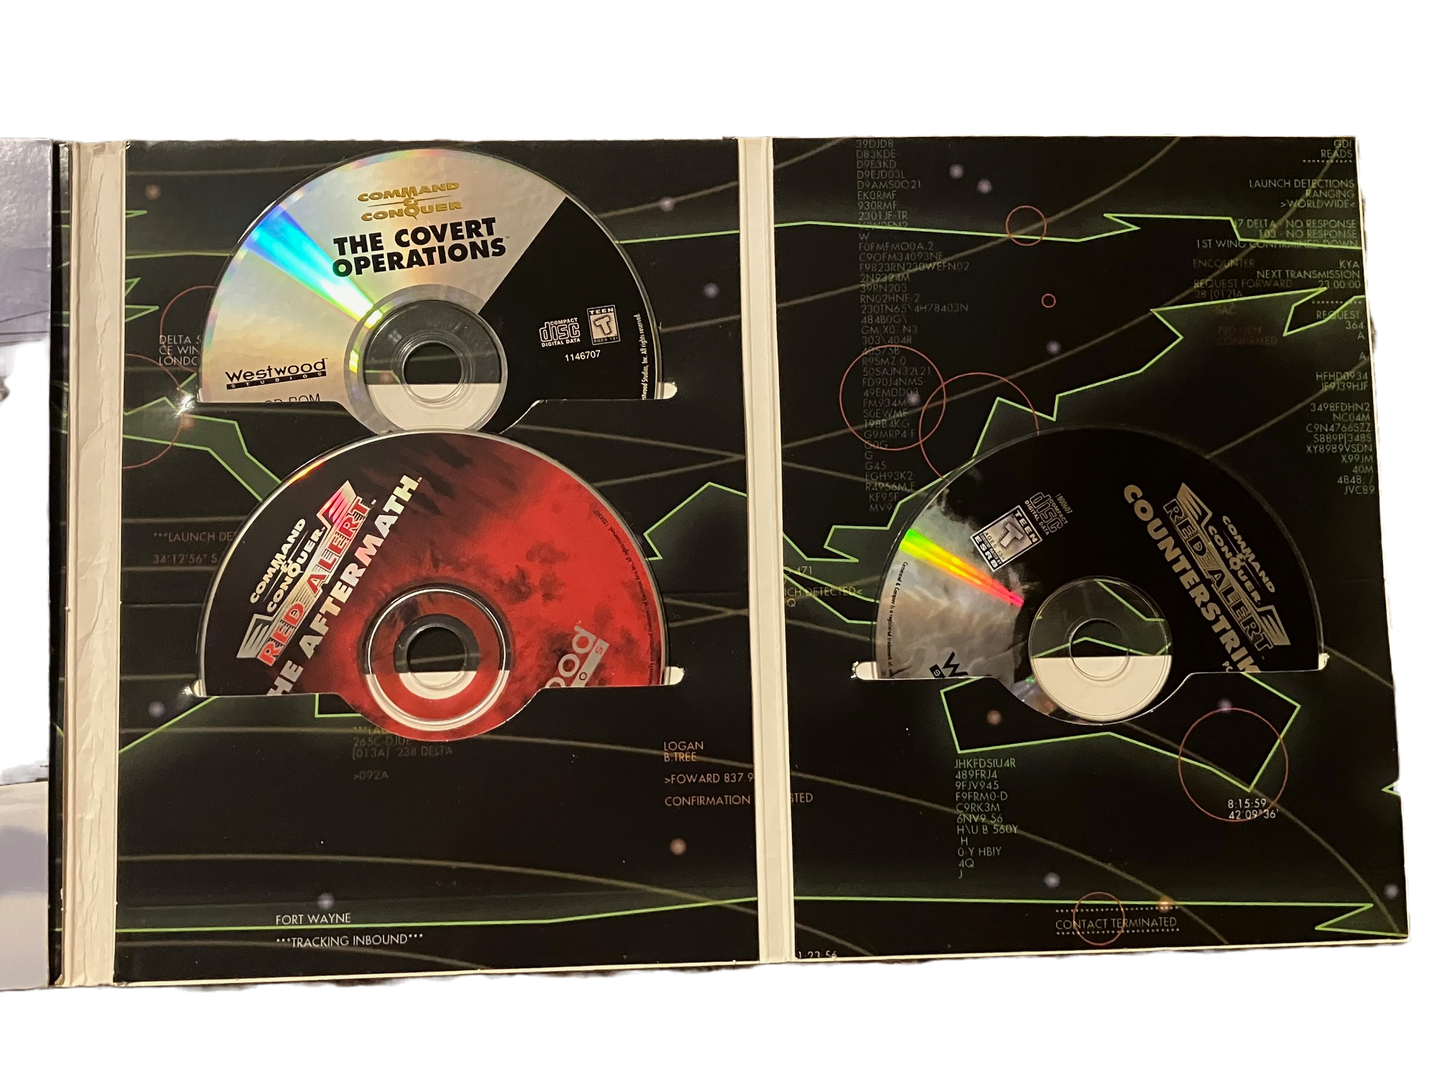 Command & Conquer Worldwide Warfare PC CD Rom Game.